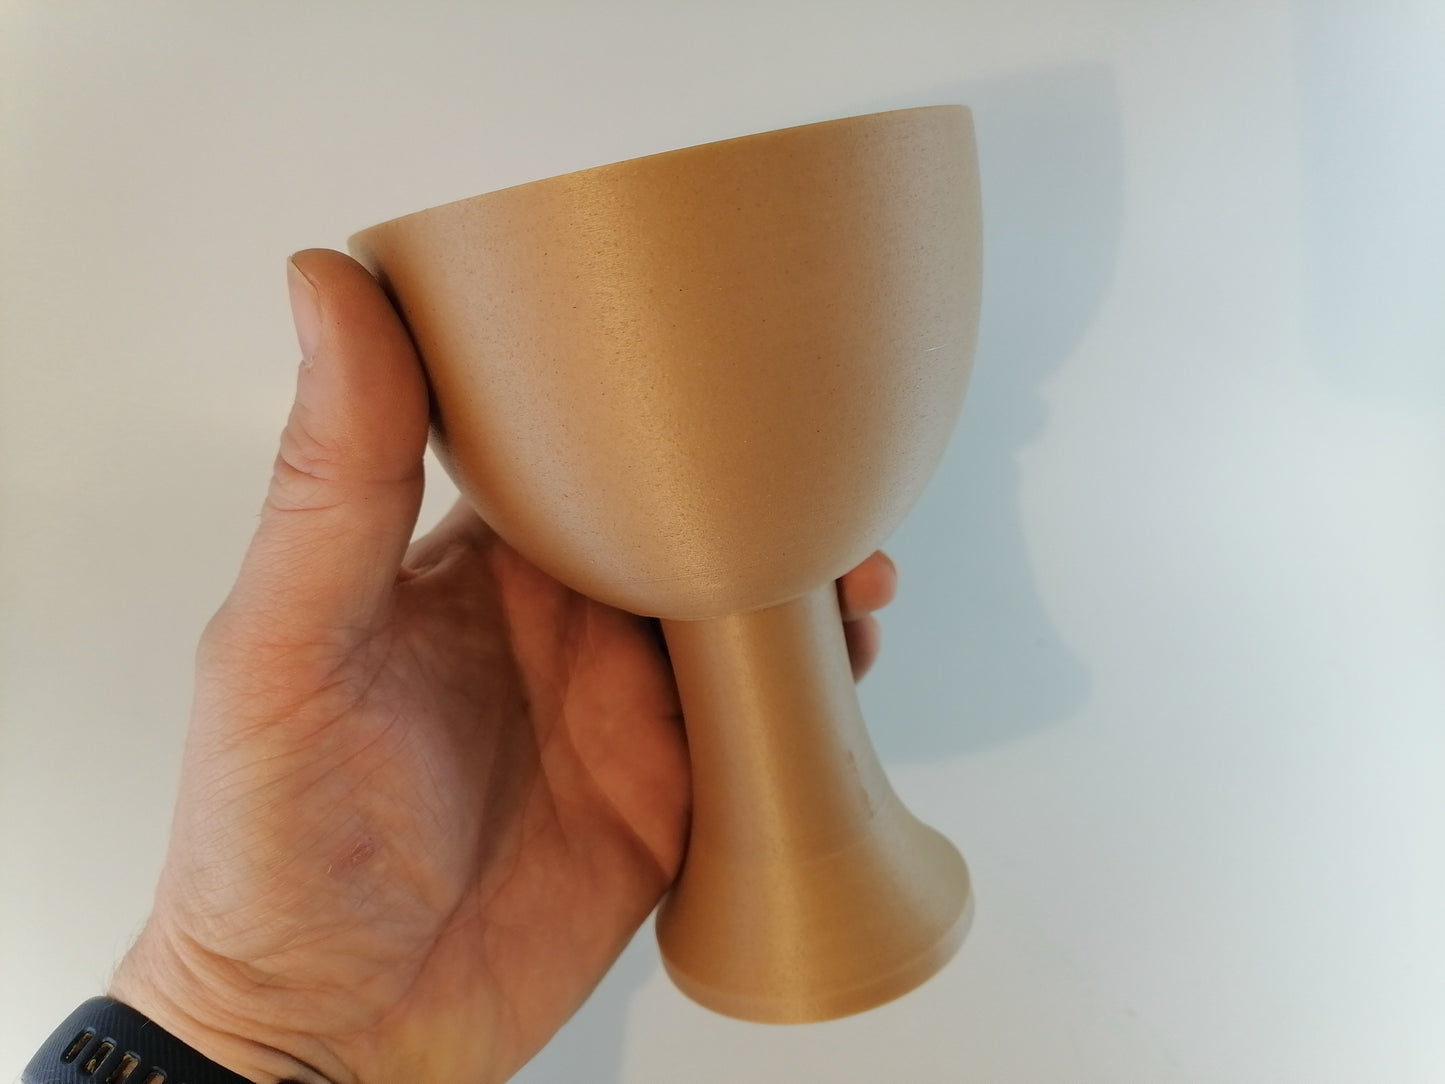 THE HOLY GRAIL - Museum Artifact - 3D Printed Replica